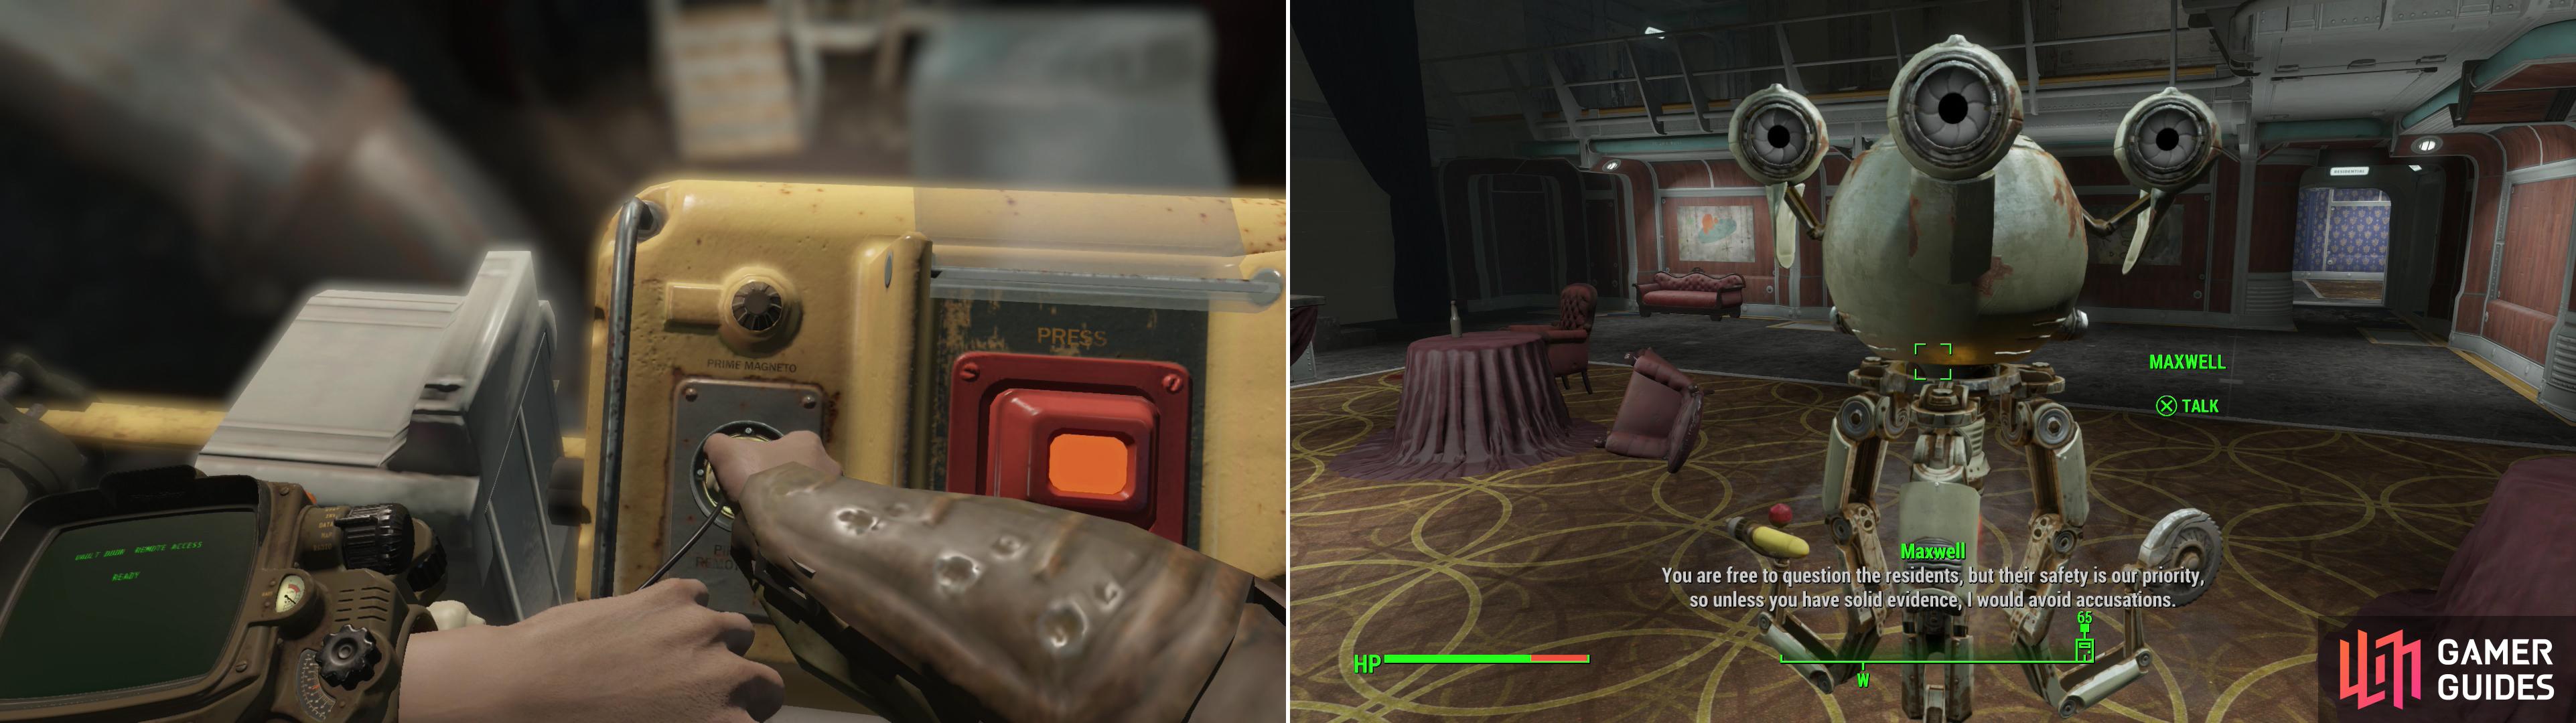 Make your way through the hotel and interface with the Vault 118 door controls (left) then talk to Maxwell to learn some specifics about the murder (right)… and some rules for handling the vault dwellers.